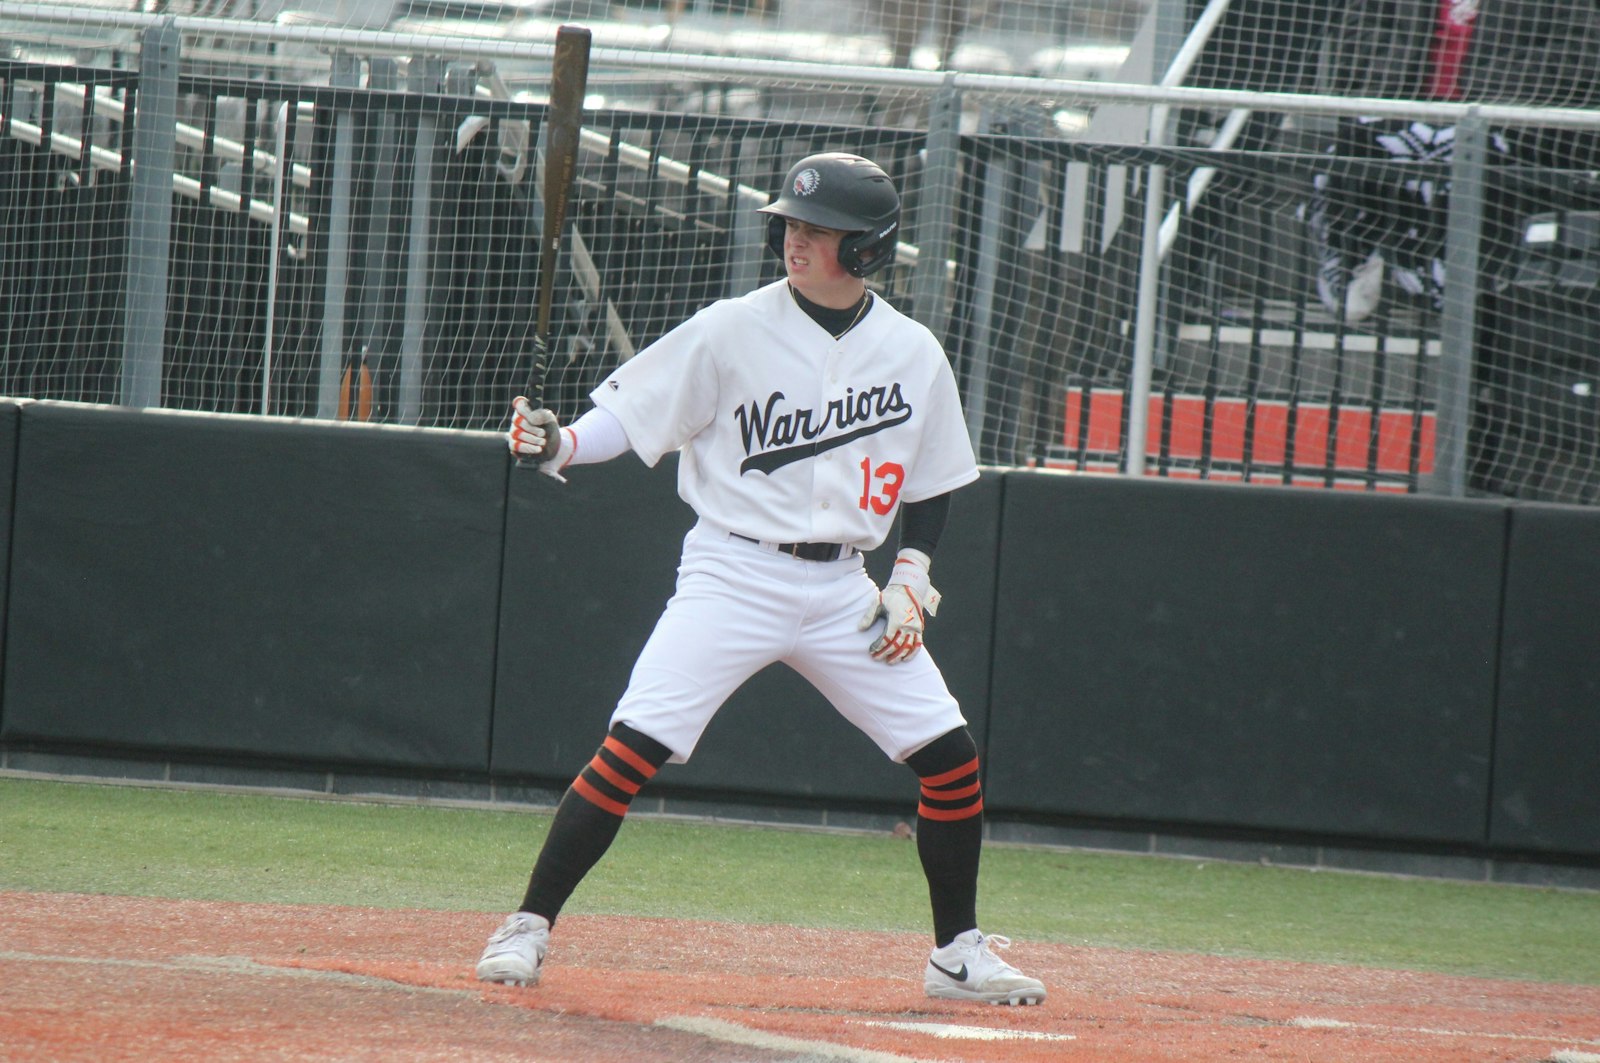 Cash VanAmeyde reached base on a triple, a single, a walk and a fielder’s choice against Detroit Western. His brothers, Chase and Cole, join him in the Brother Rice lineup.